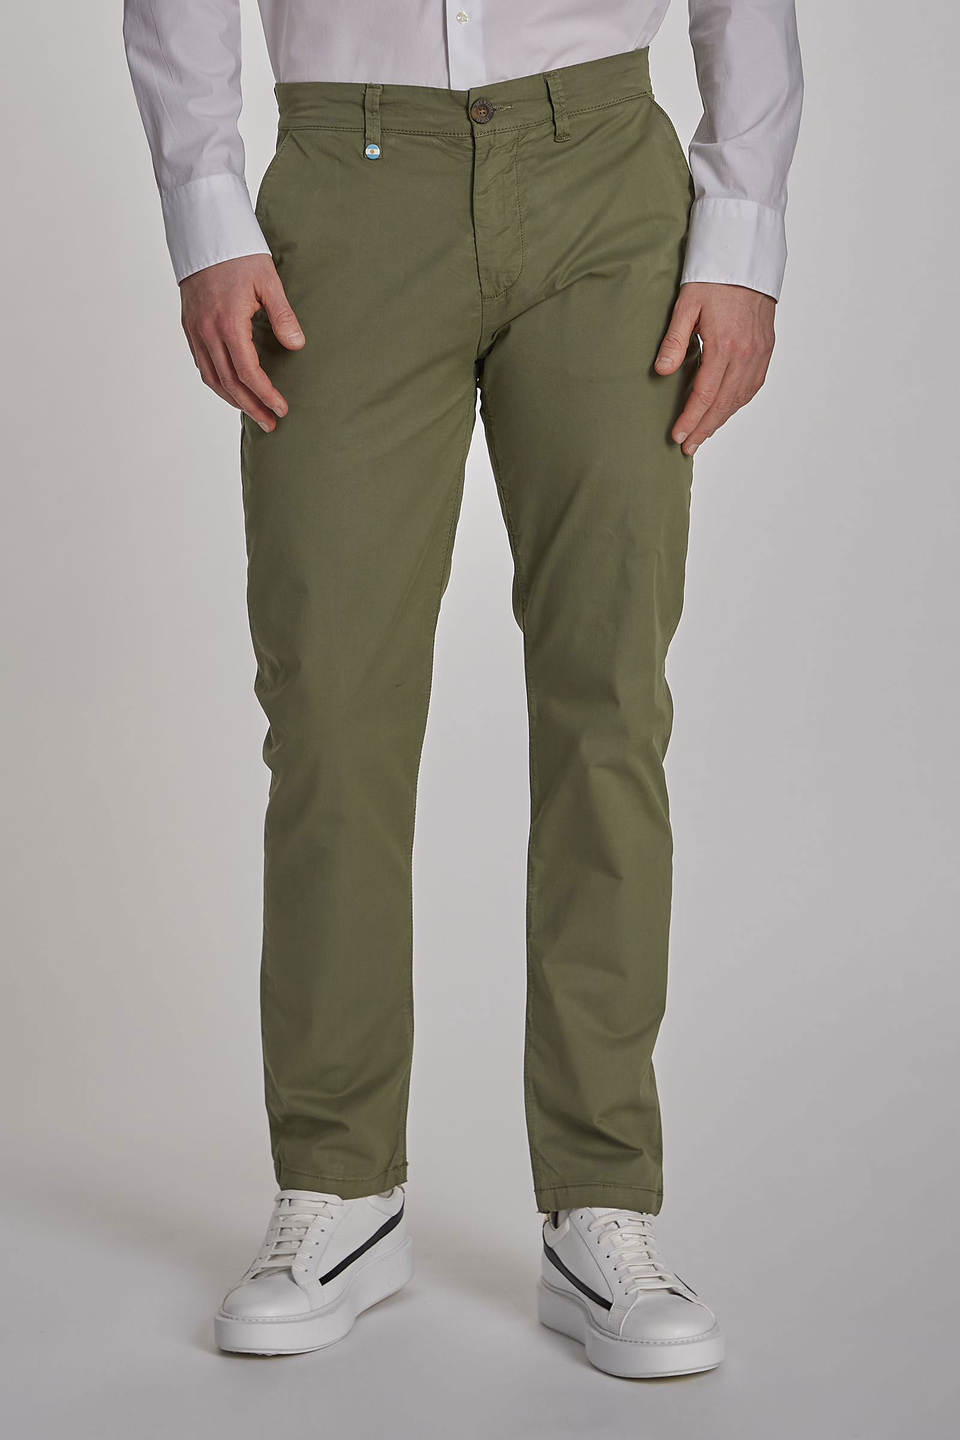 for Men richard j Green Slacks and Chinos Casual trousers and trousers brown Regular-fit Stretch-cotton Trousers in Khaki Mens Clothing Trousers 